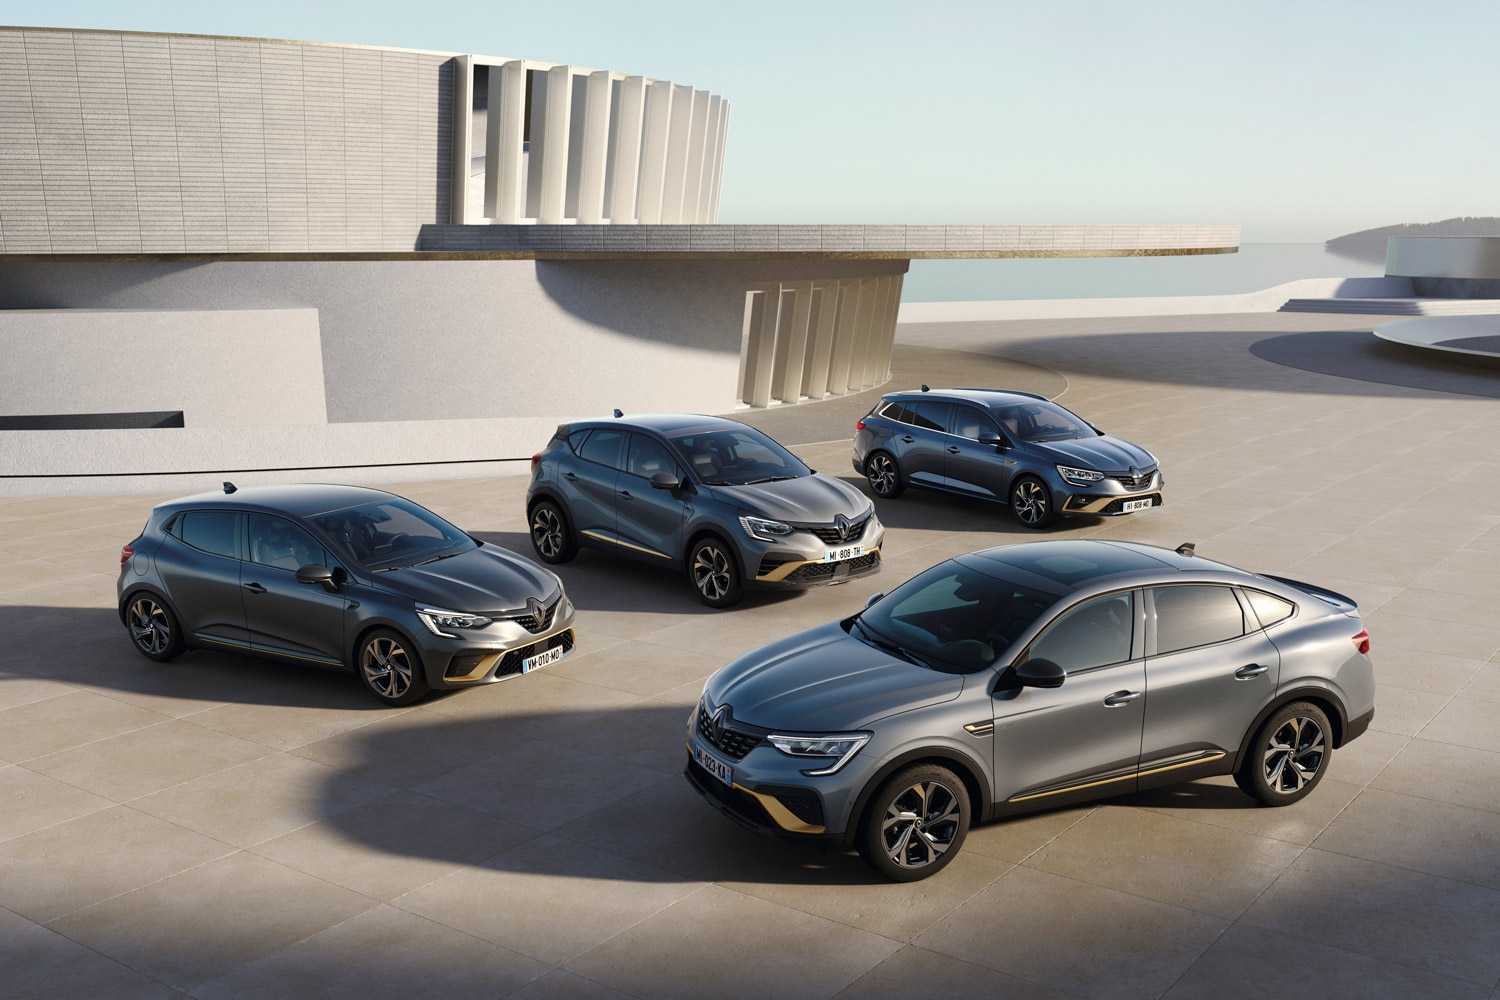 Renault Megane III images  It's your auto world :: New cars, auto news,  reviews, photos, videos